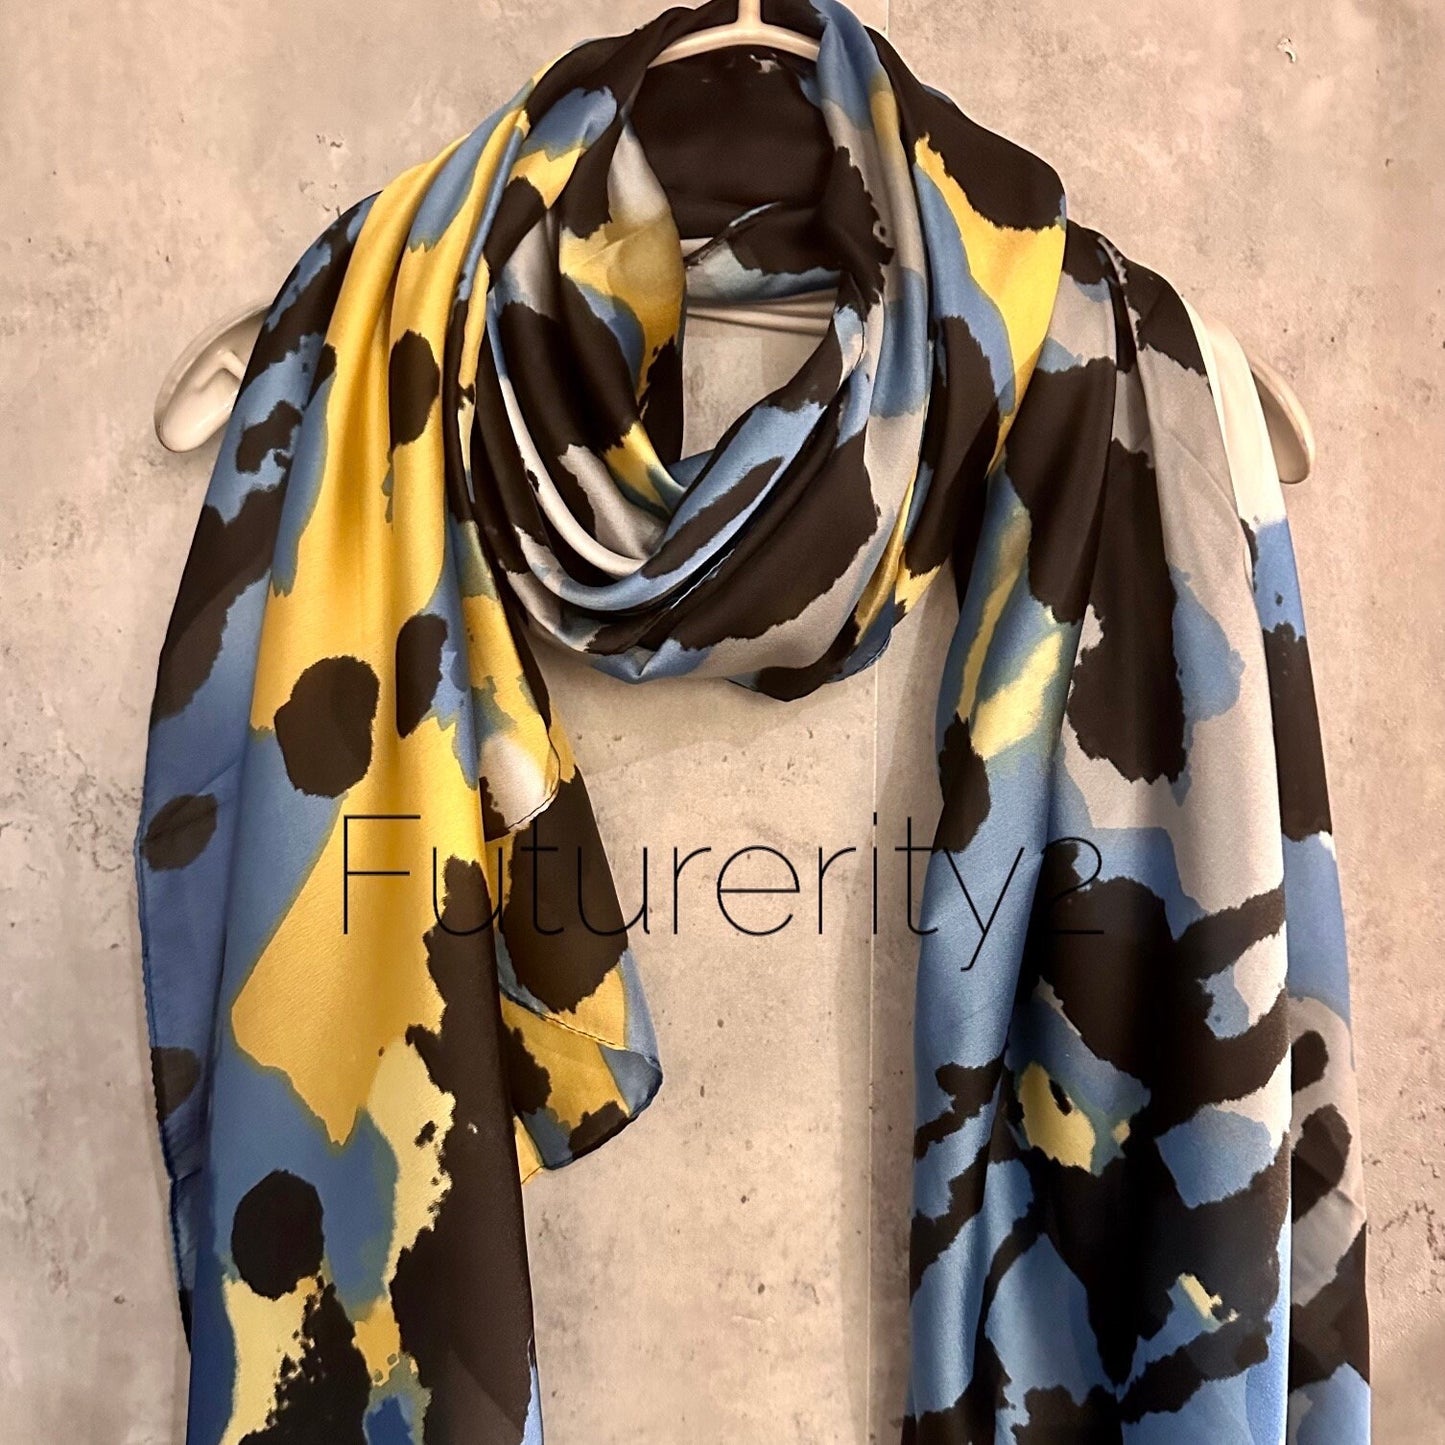 Splotches Color Blue Yellow Silk Scarf/Spring Summer Autumn Scarf/Scarf Women/Gifts For Mom/Gifts For Her Birthday Christmas/UK Seller